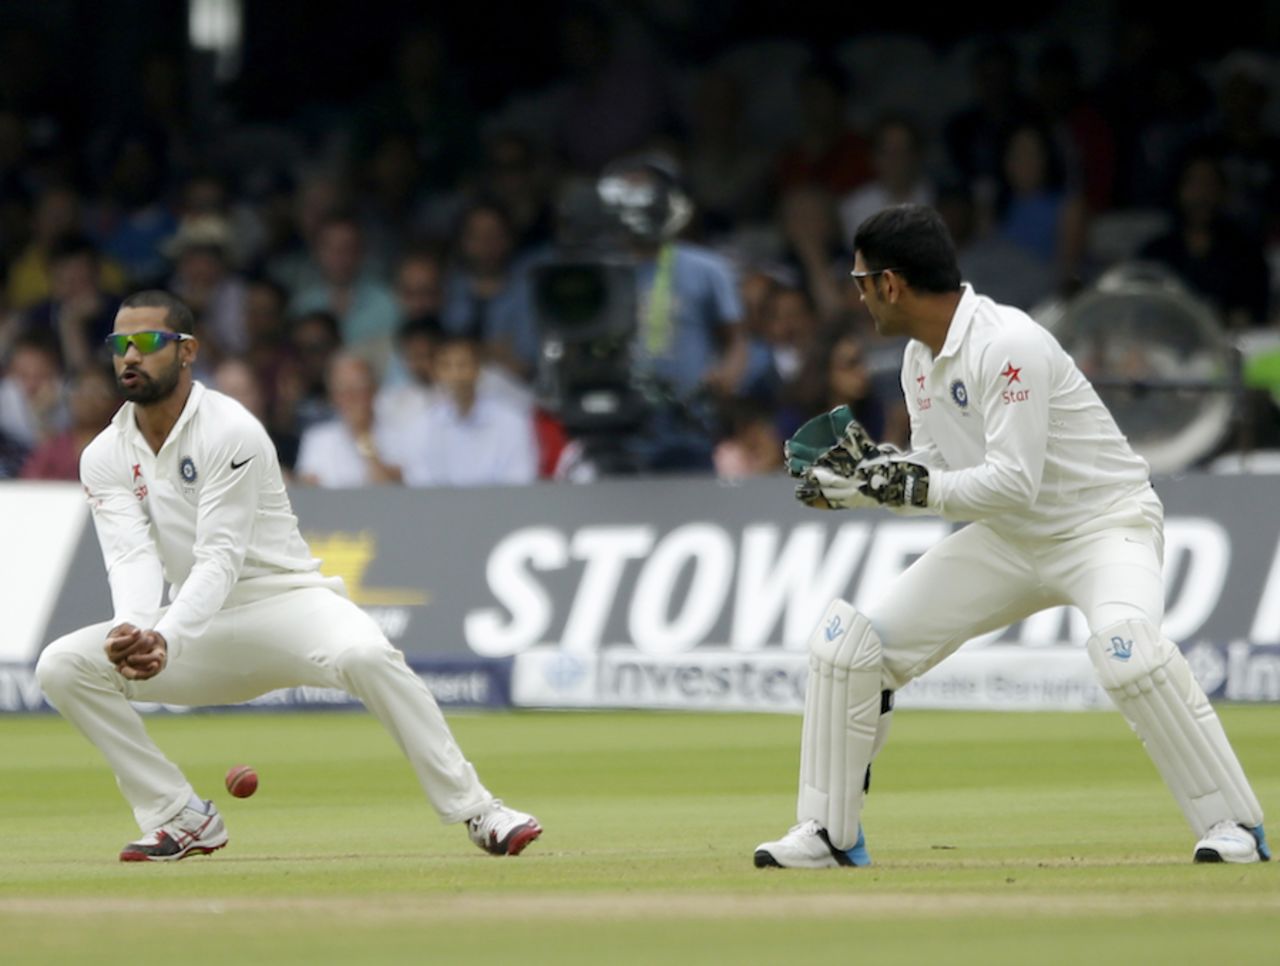 An edge falls just short of Shikhar Dhawan at first slip, England v India, 2nd Investec Test, Lord's, 5th day, July 21, 2014